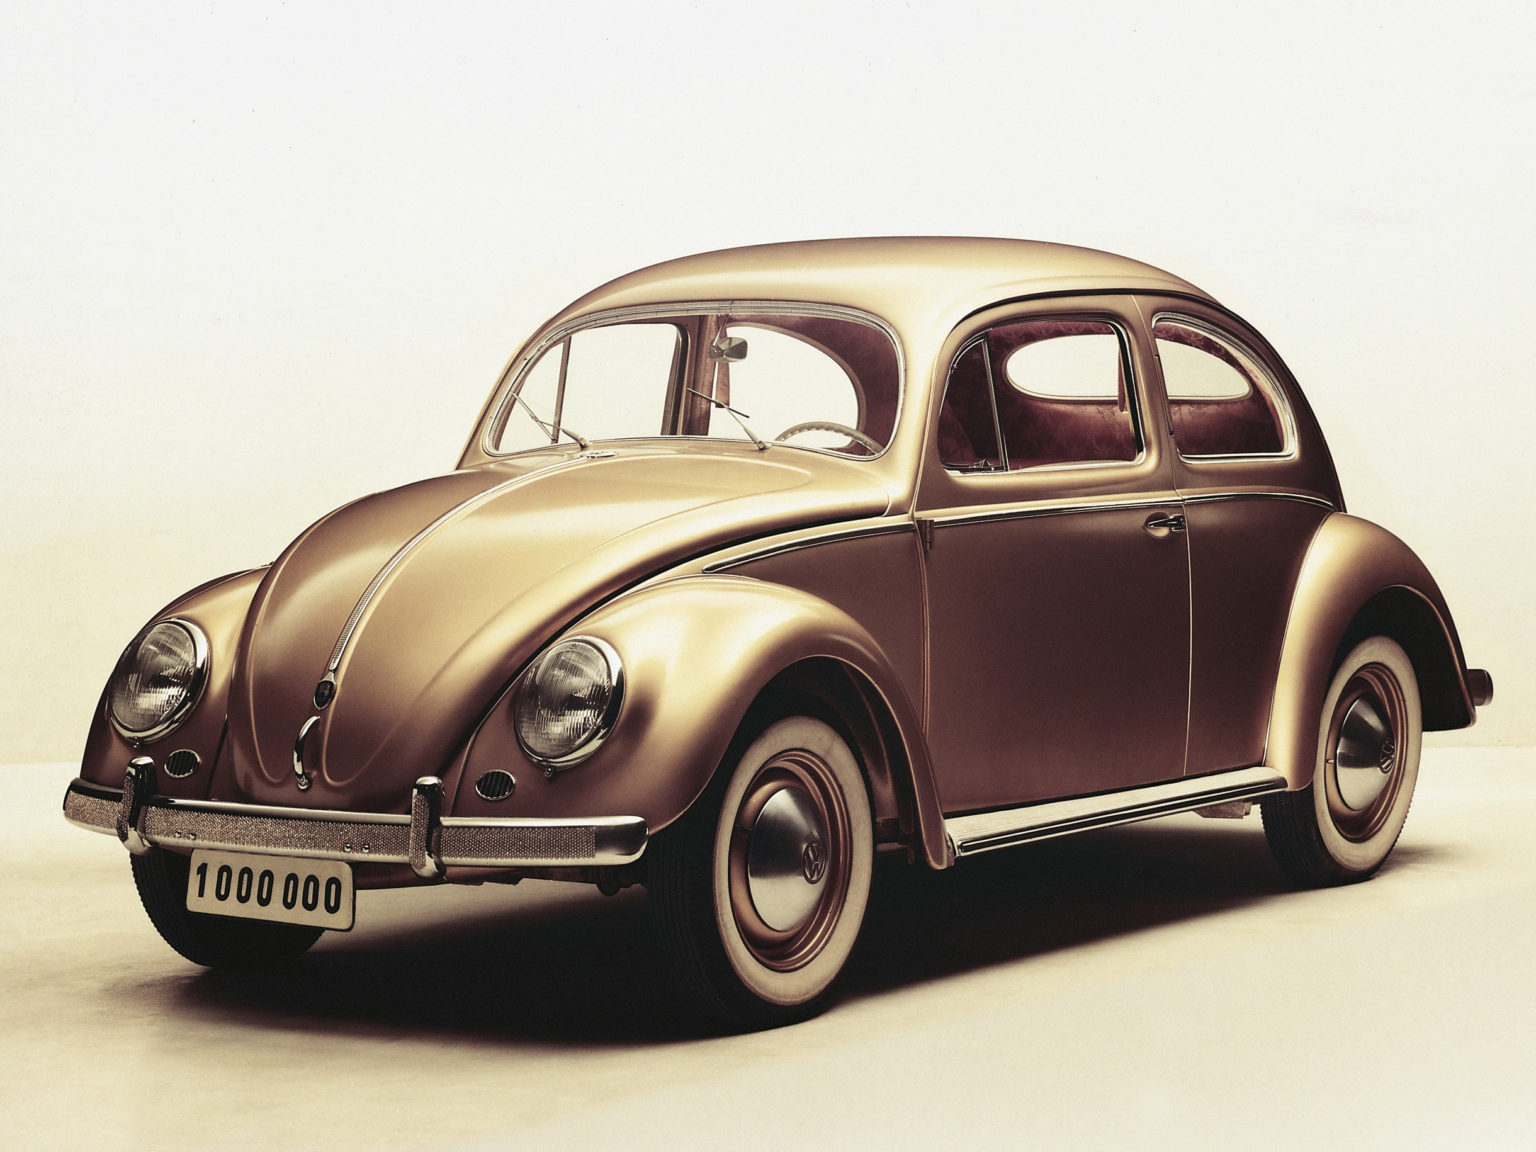 Volkswagen created this one-off Beetle to celebrate a signninficannt anniversary.